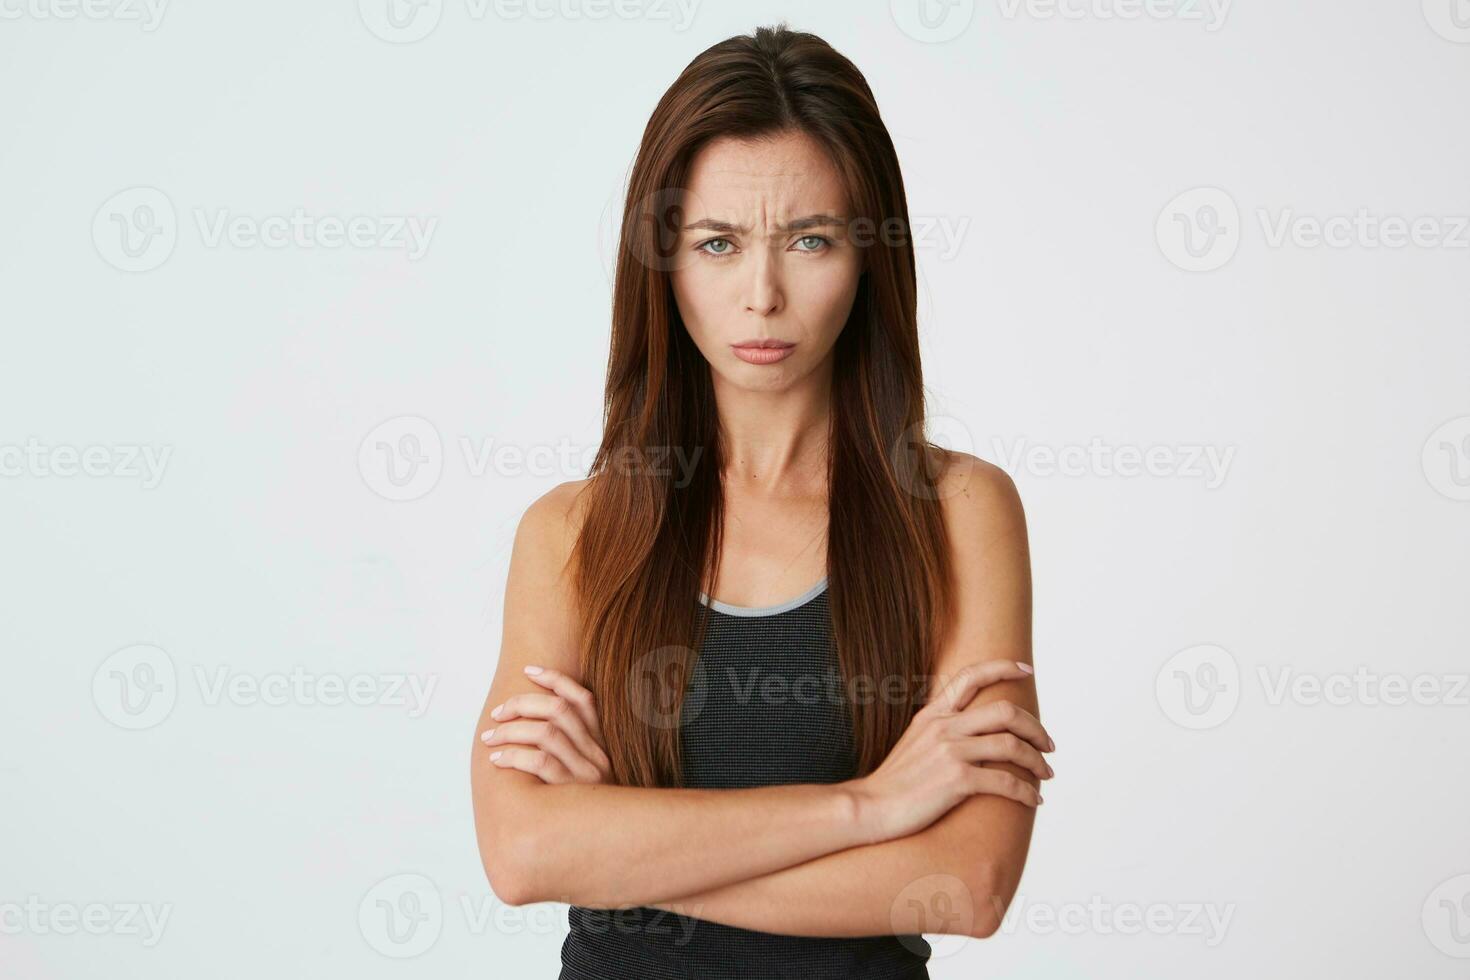 Sad upset young woman with long hair standing with arms crossed and looking offended isolated over white background Feels disappointed photo